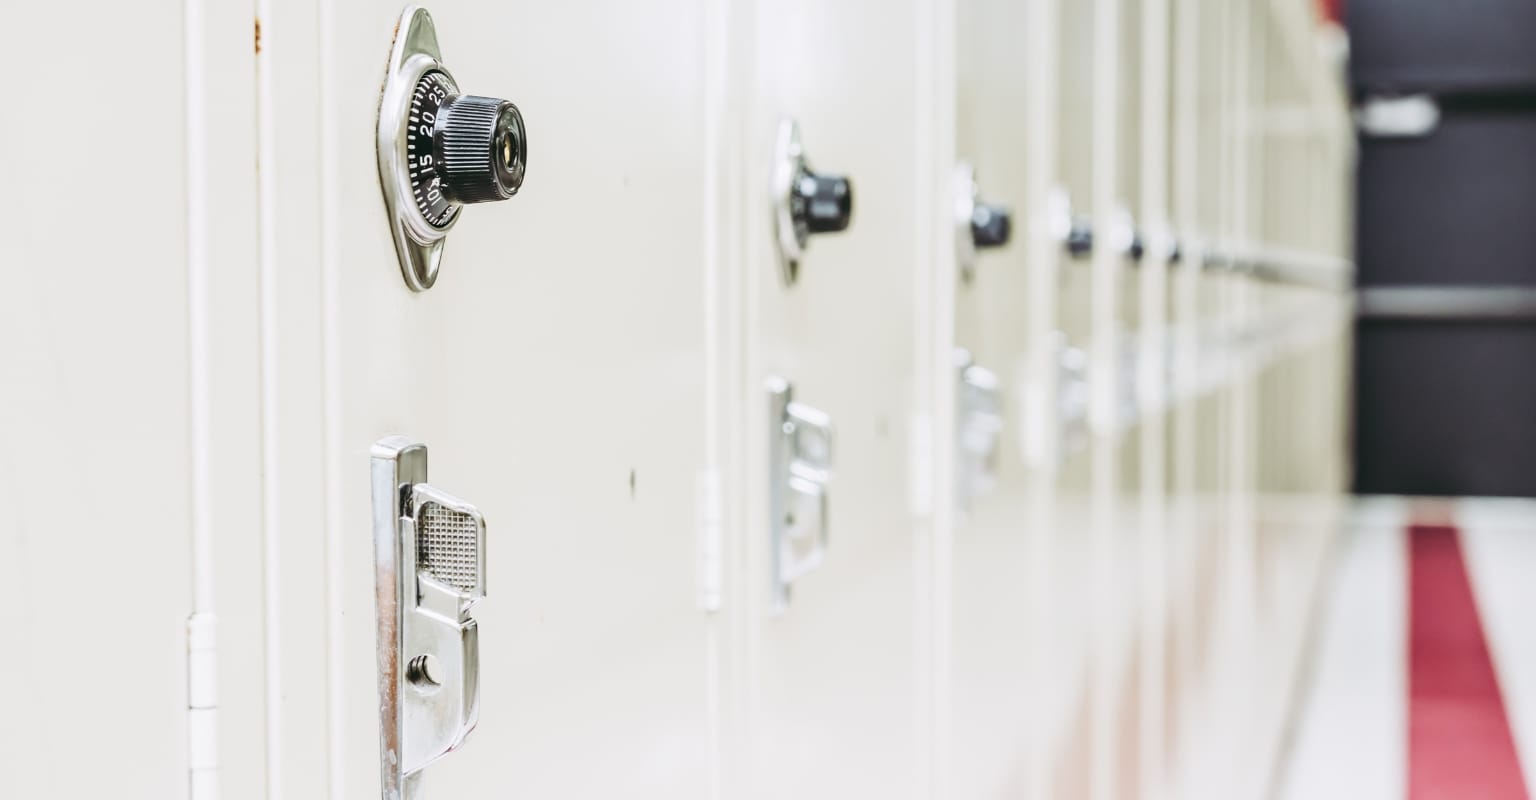 What Lock is best for Your Lockers?